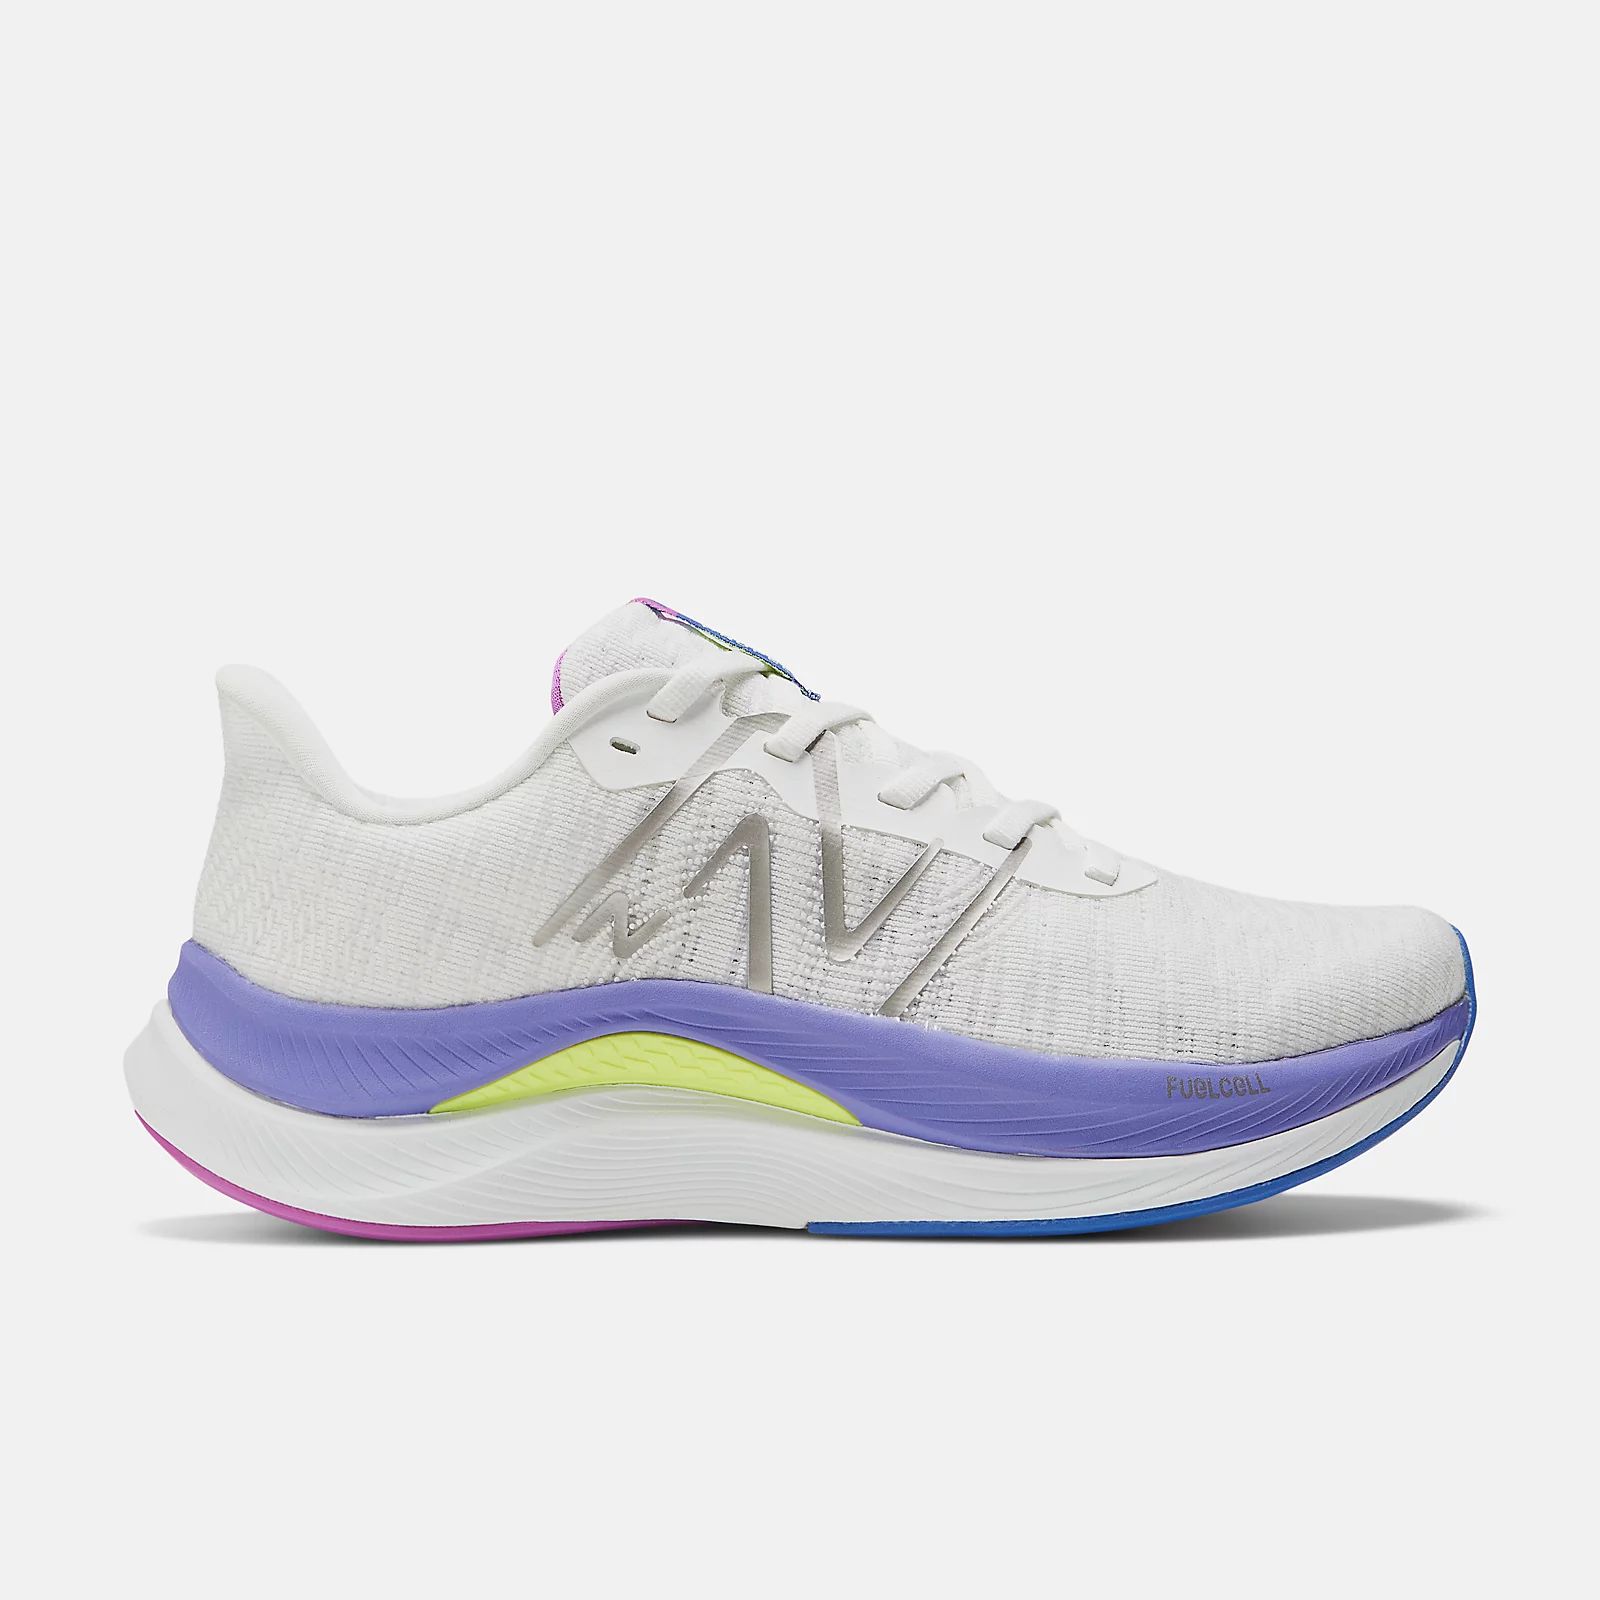 FuelCell Propel v4 | Joe's New Balance Outlet